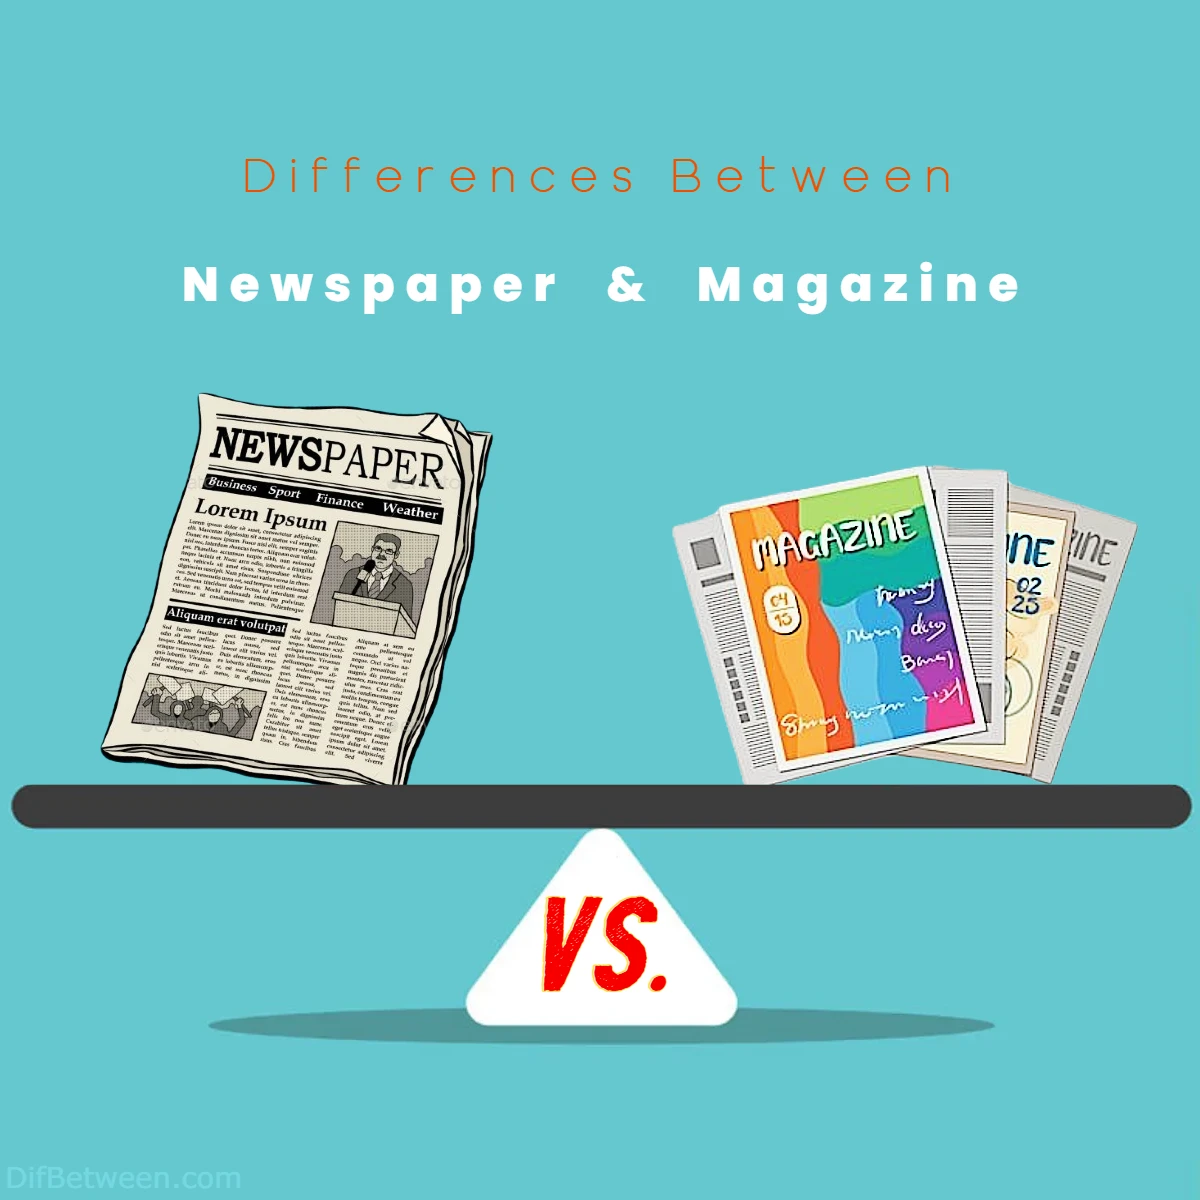 Differences Between Newspaper vs Magazine